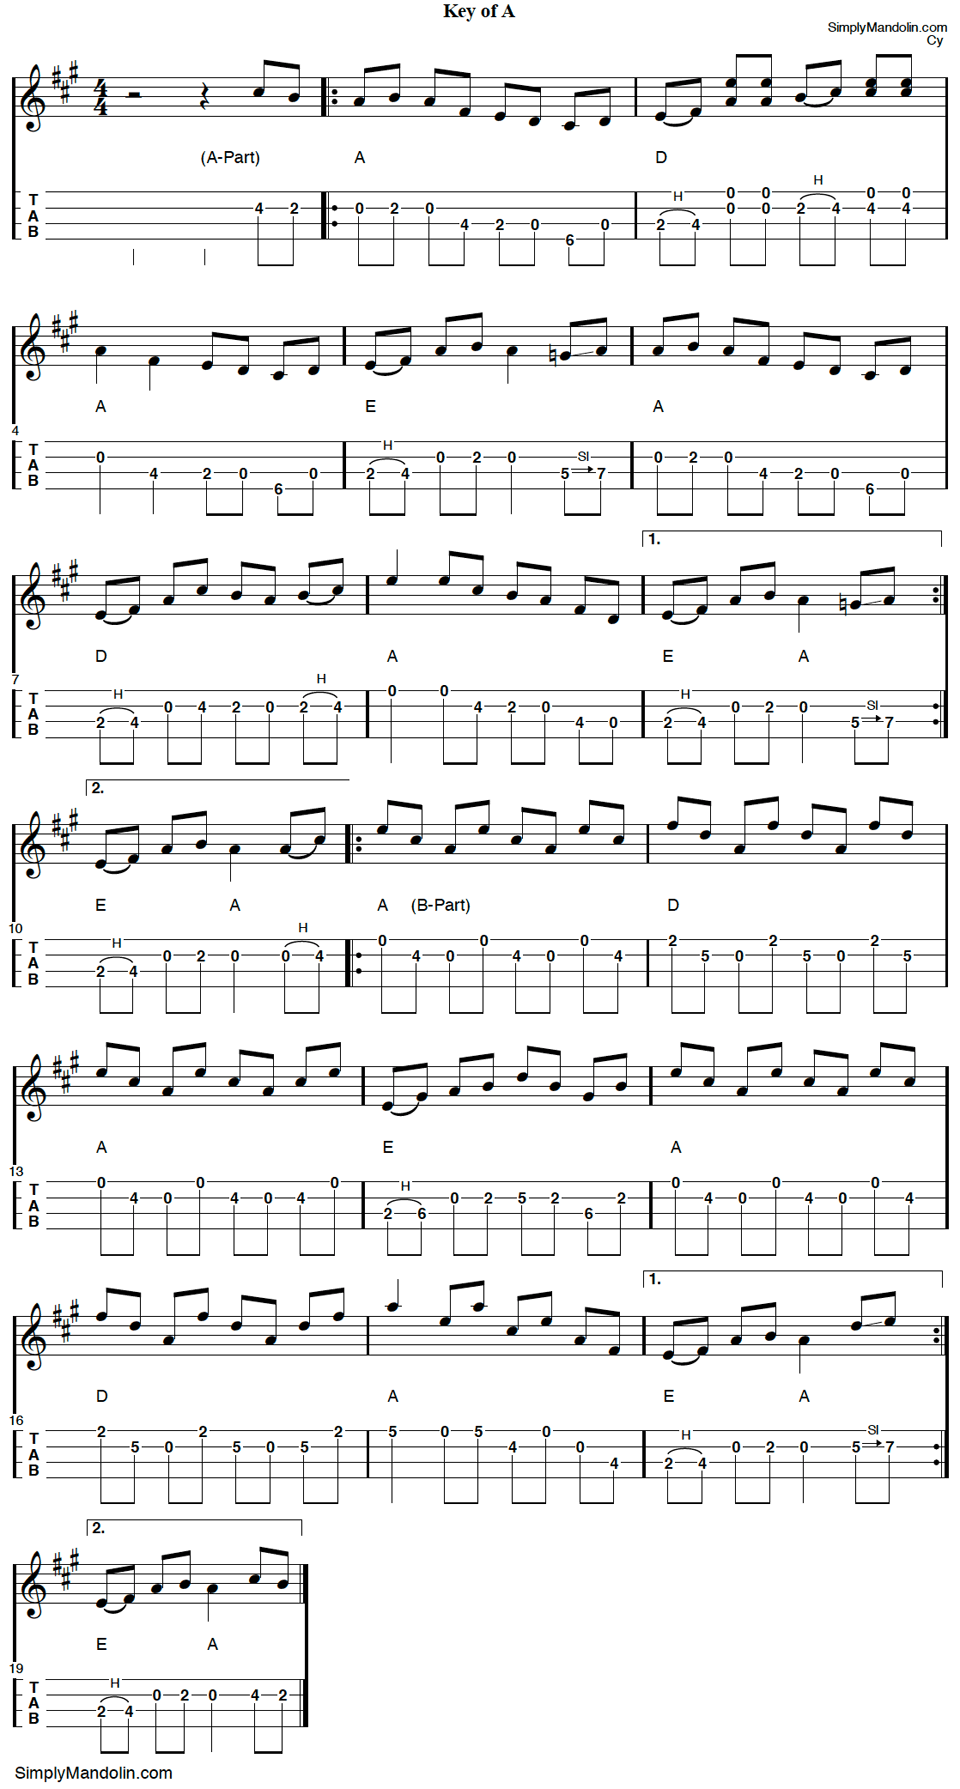 Image of Mandolin tab for the Bluegrass tune "Grey Eagle".